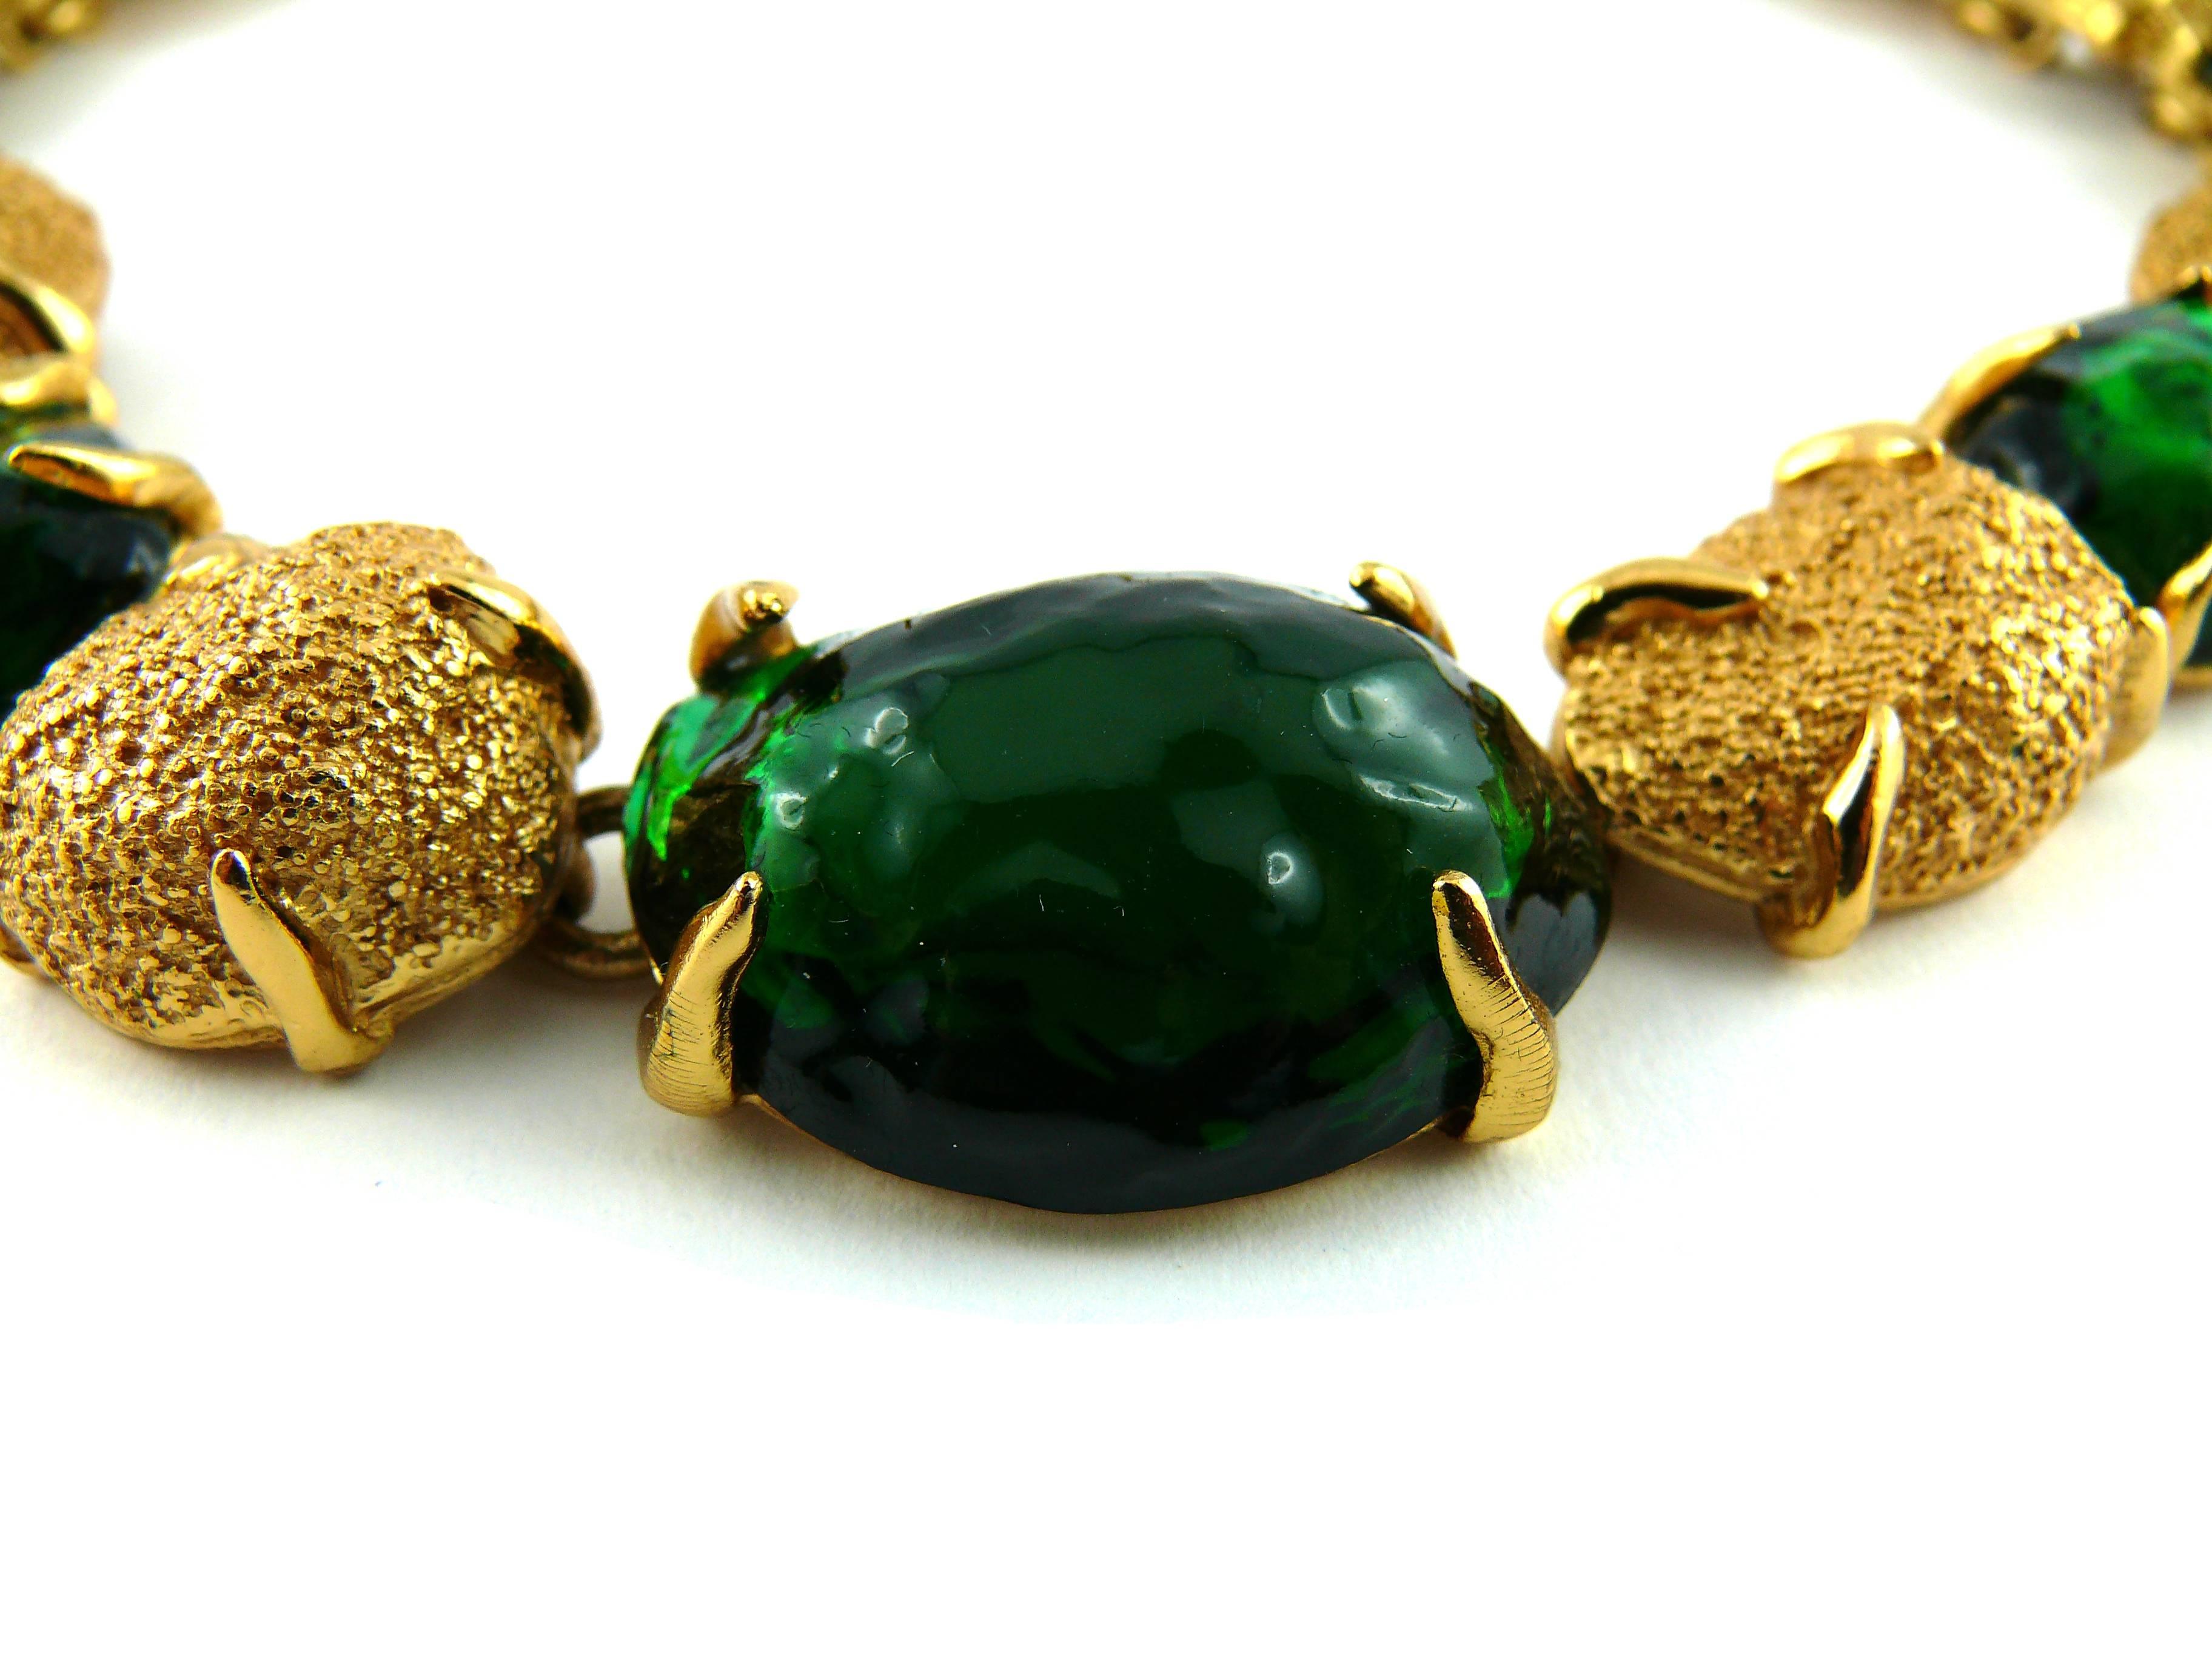 YVES SAINT LAURENT vintage necklace featuring gold tone nuggets and faux emerald cabochons.

Created by parurier ROBERT GOOSSENS.

Yves Saint Laurent love clasp with T-bar closure.

Embossed YVES SAINT LAURENT Paris Made in France.

Comes